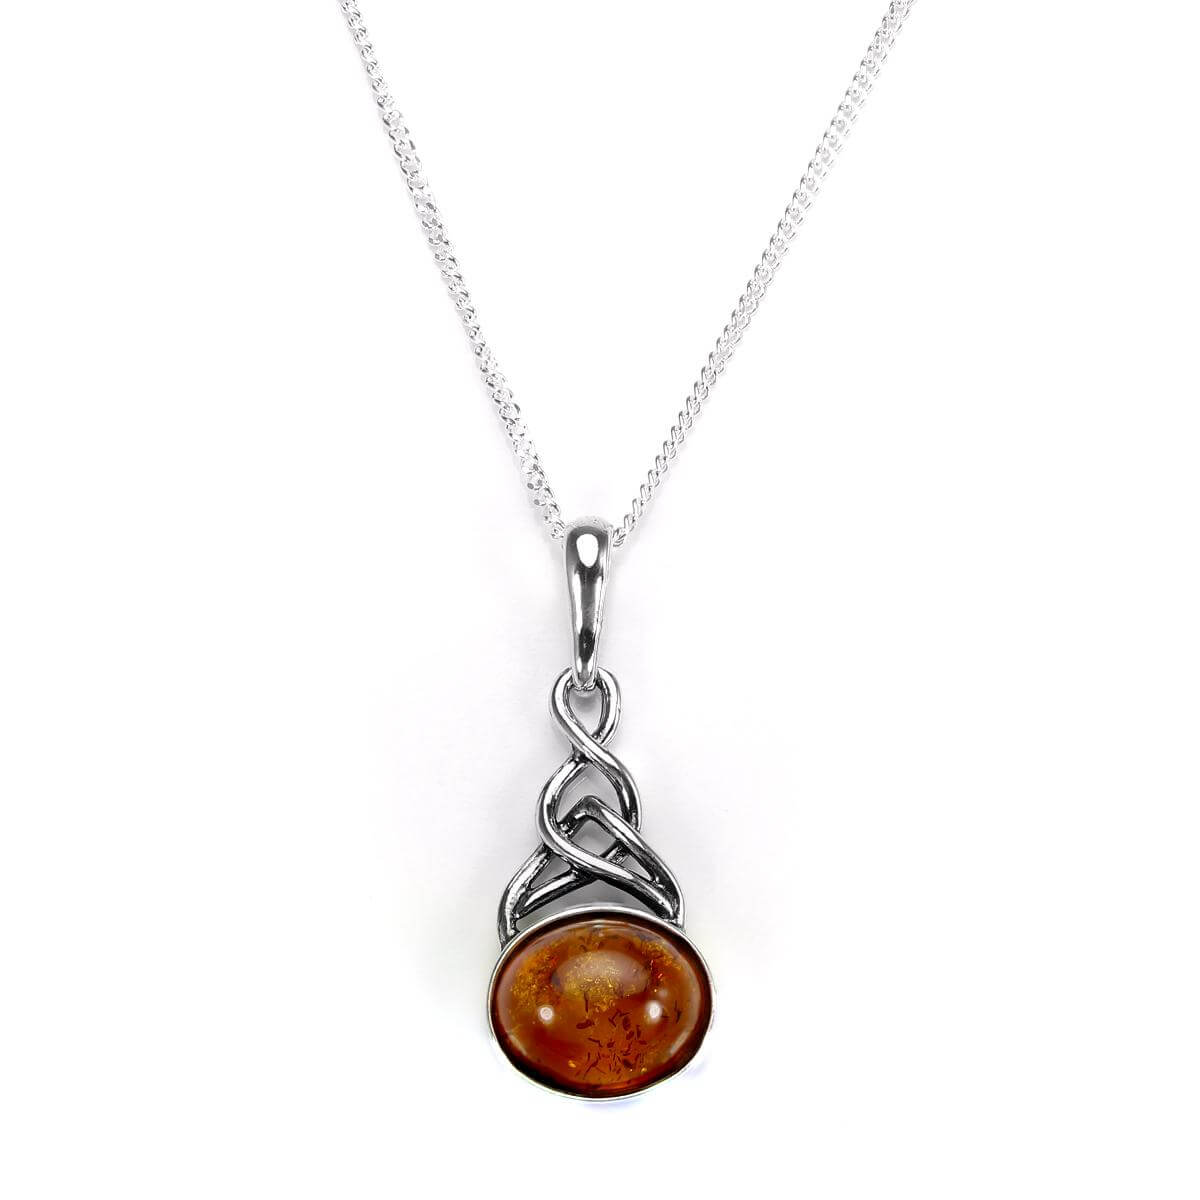 Woven Sterling Silver & Drop Baltic Amber Pendant - 16 - 22 Inches